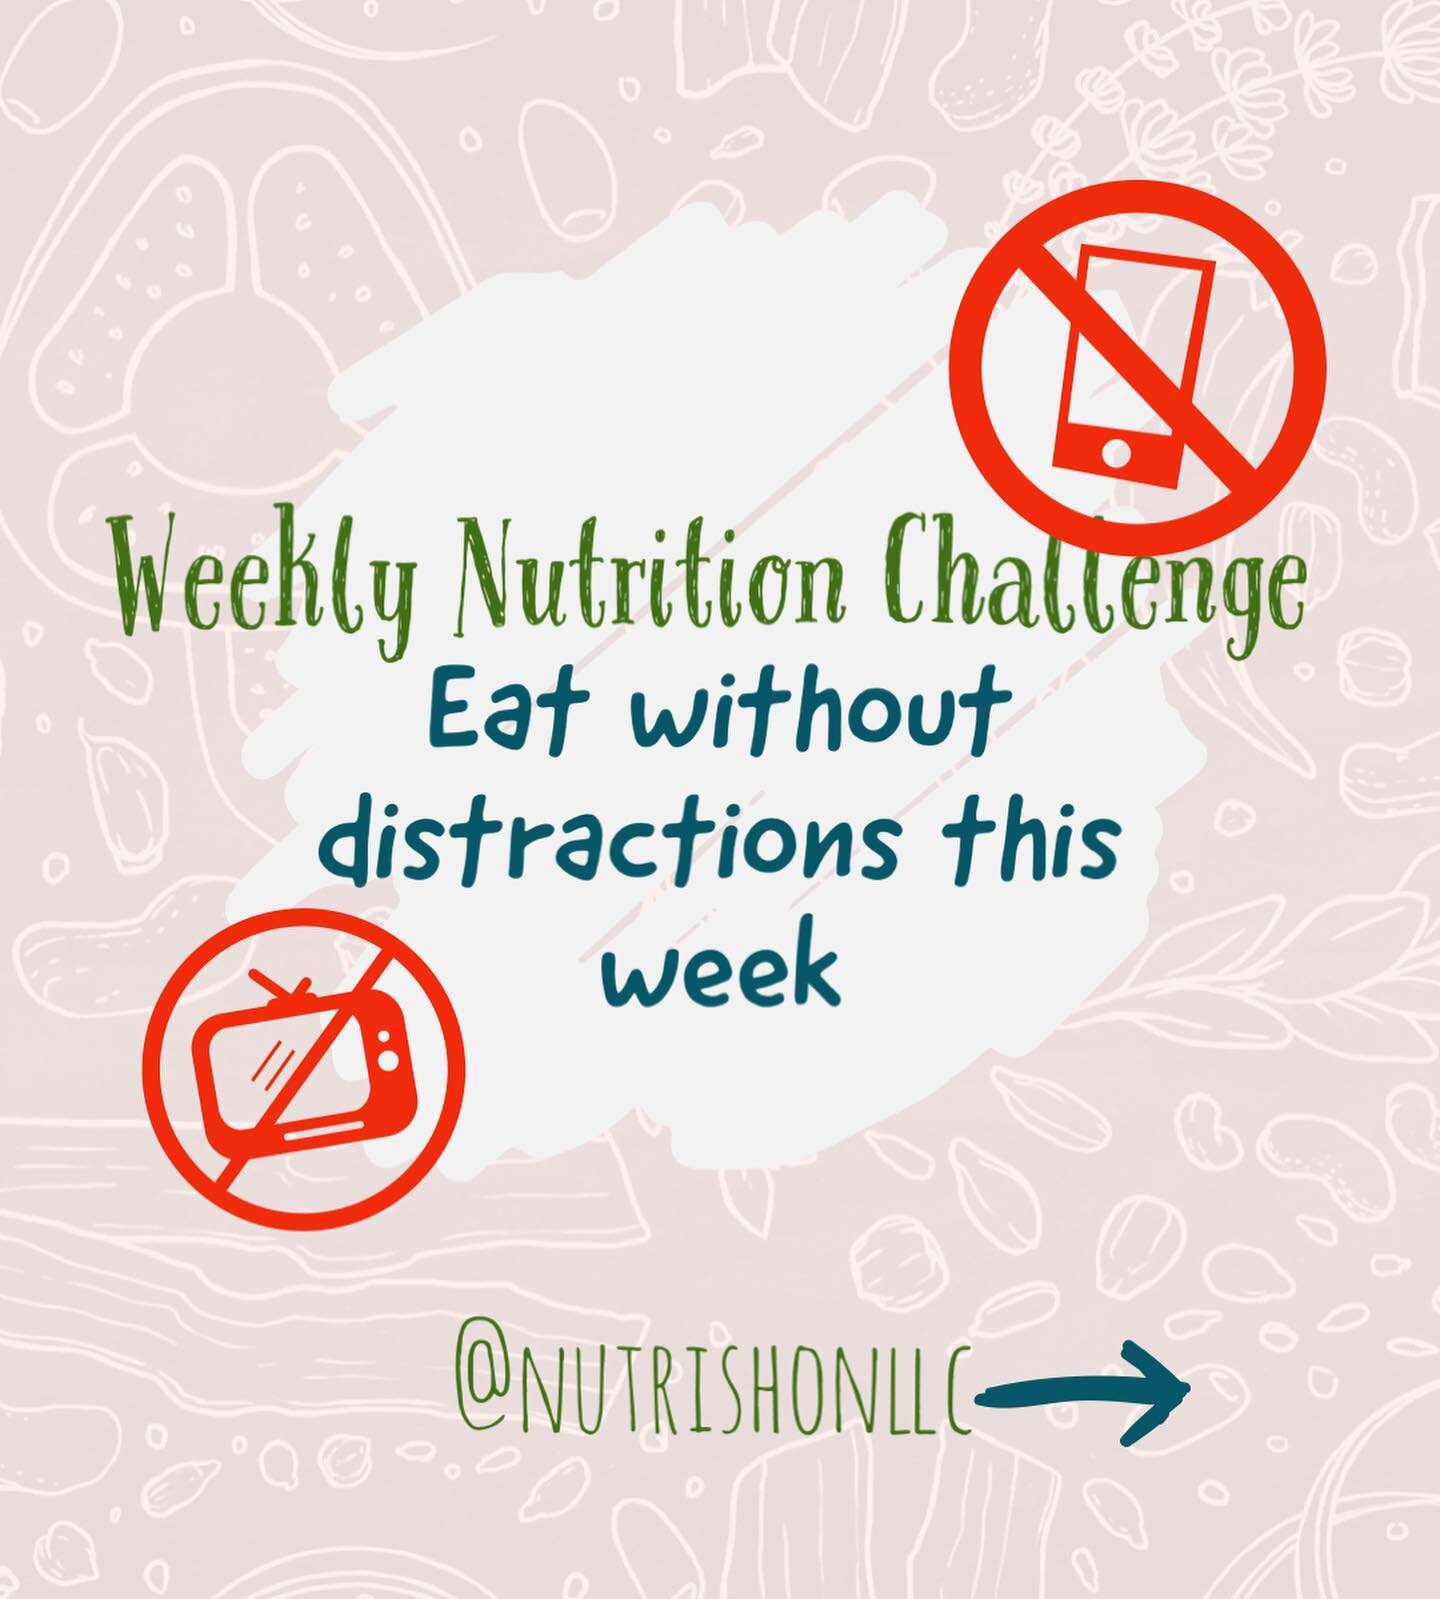 &ldquo;❤️&rdquo; this post to accept the challenge!

Eating while watching tv. Eating while checking emails. Eating while scrolling through social media. 

All habits many of us are guilty of. 

But did you know that this contributes to what is refer